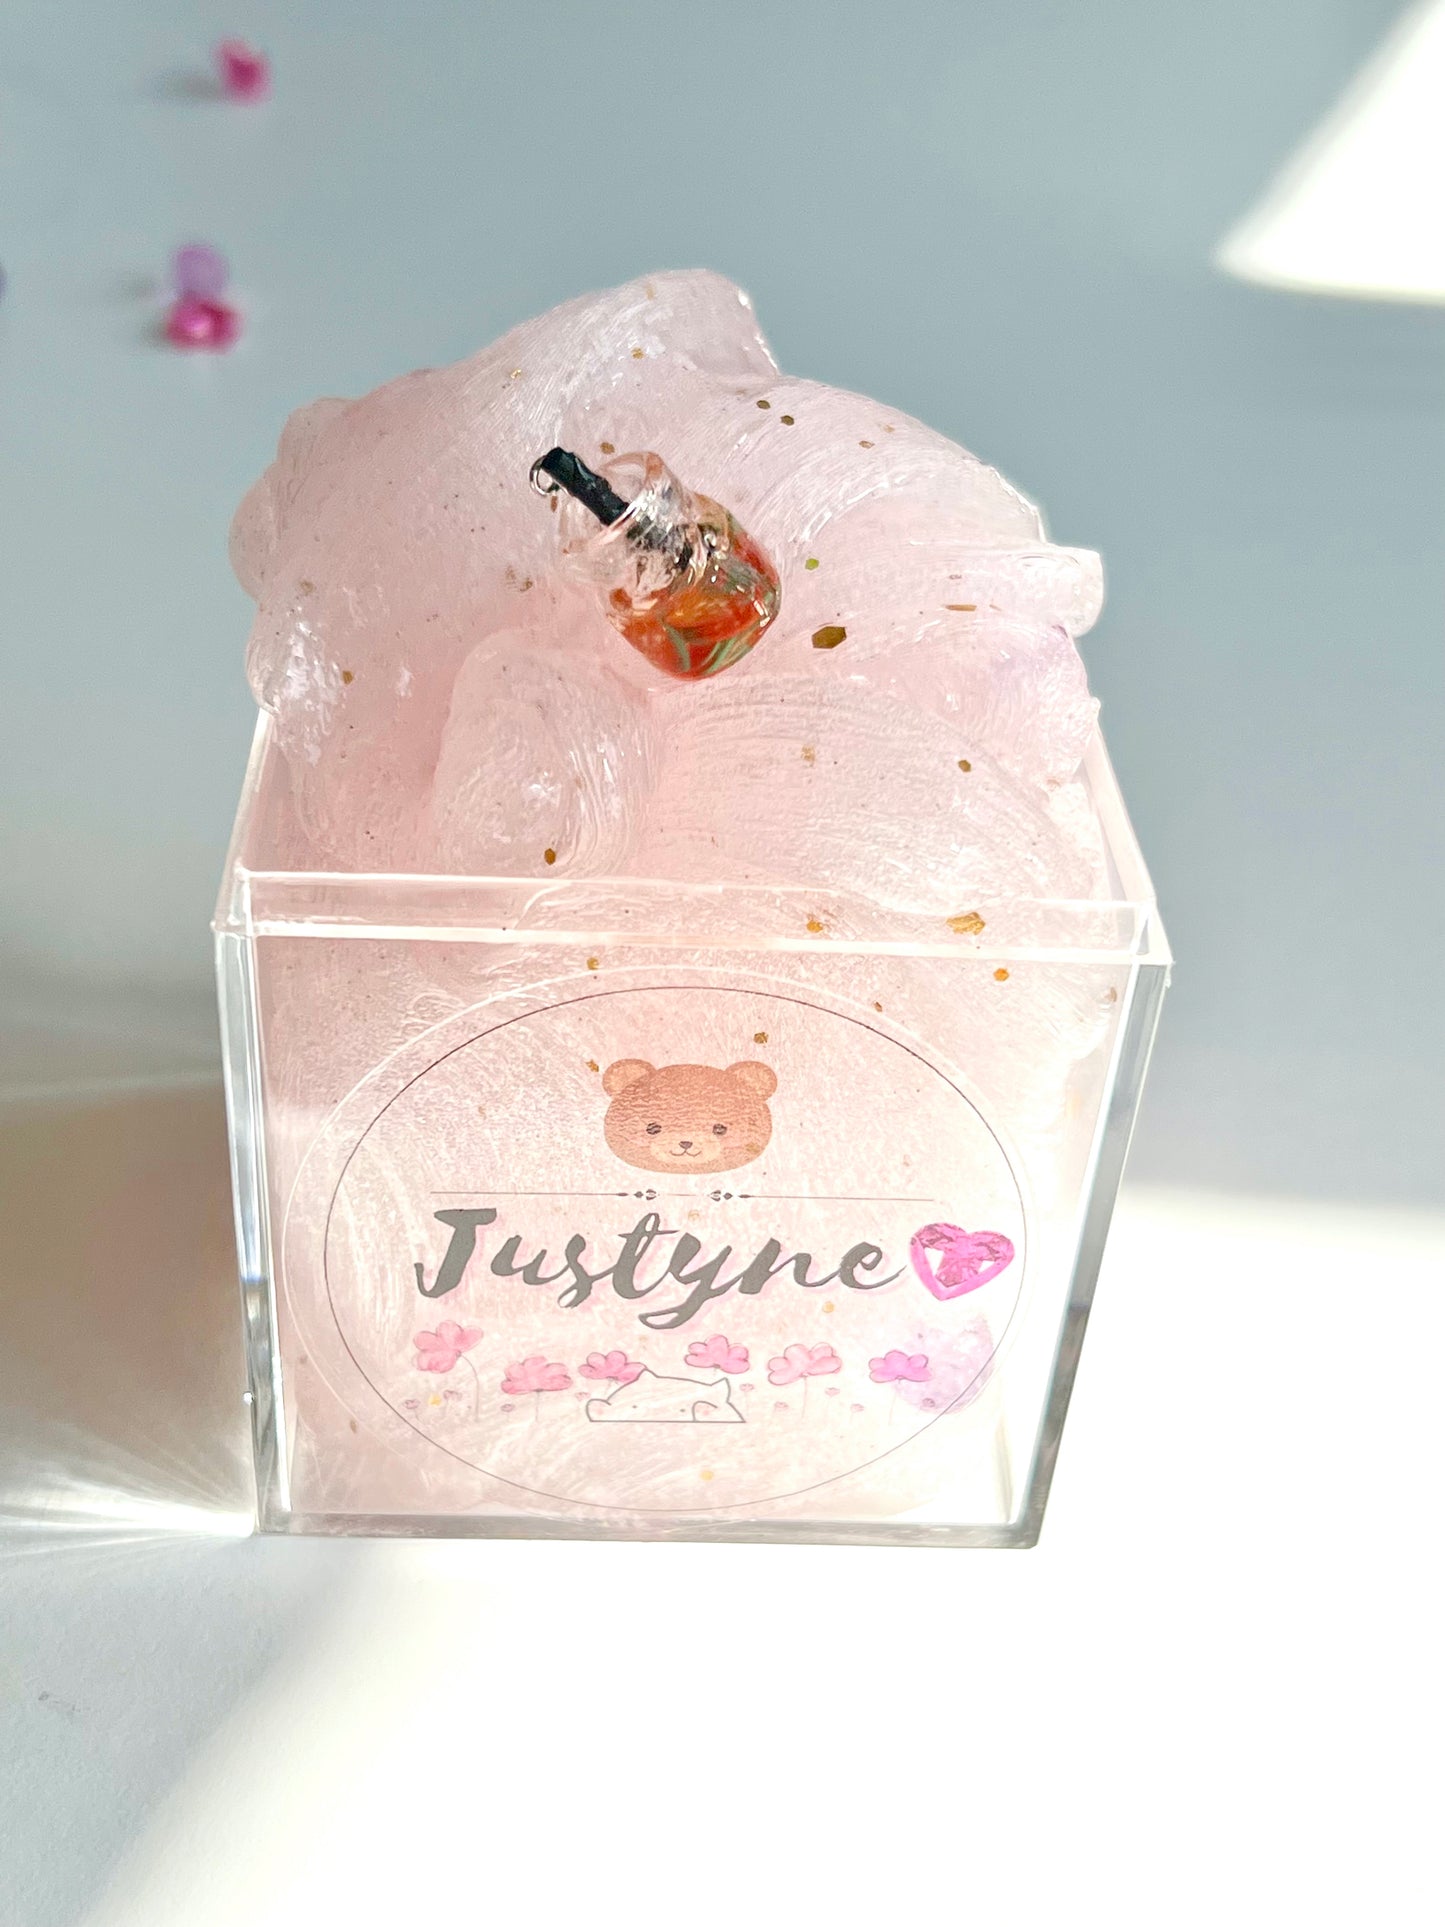 Dazzling Justyne Soft Thick Clear Slime Cube